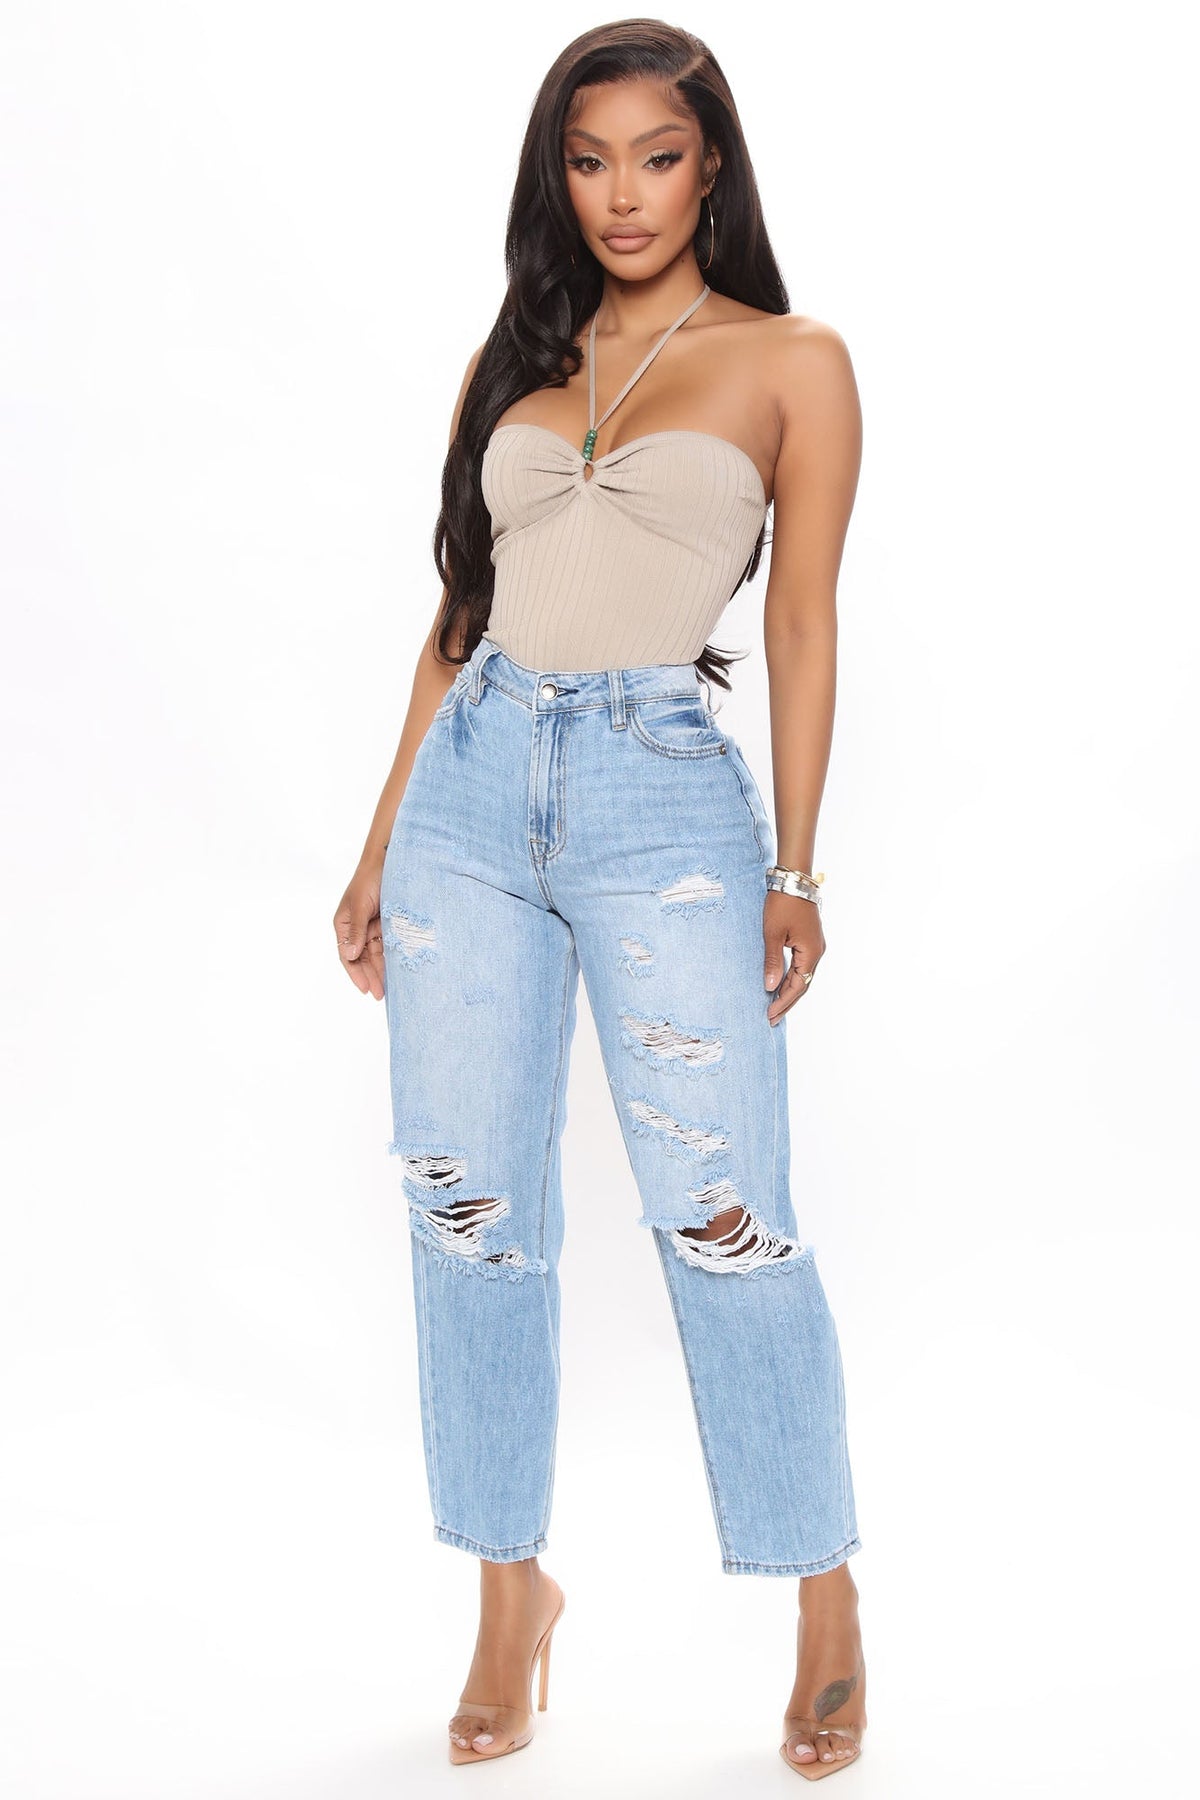 Why Don't You Relax Ripped Mom Jeans - Medium Blue Wash Ins Street